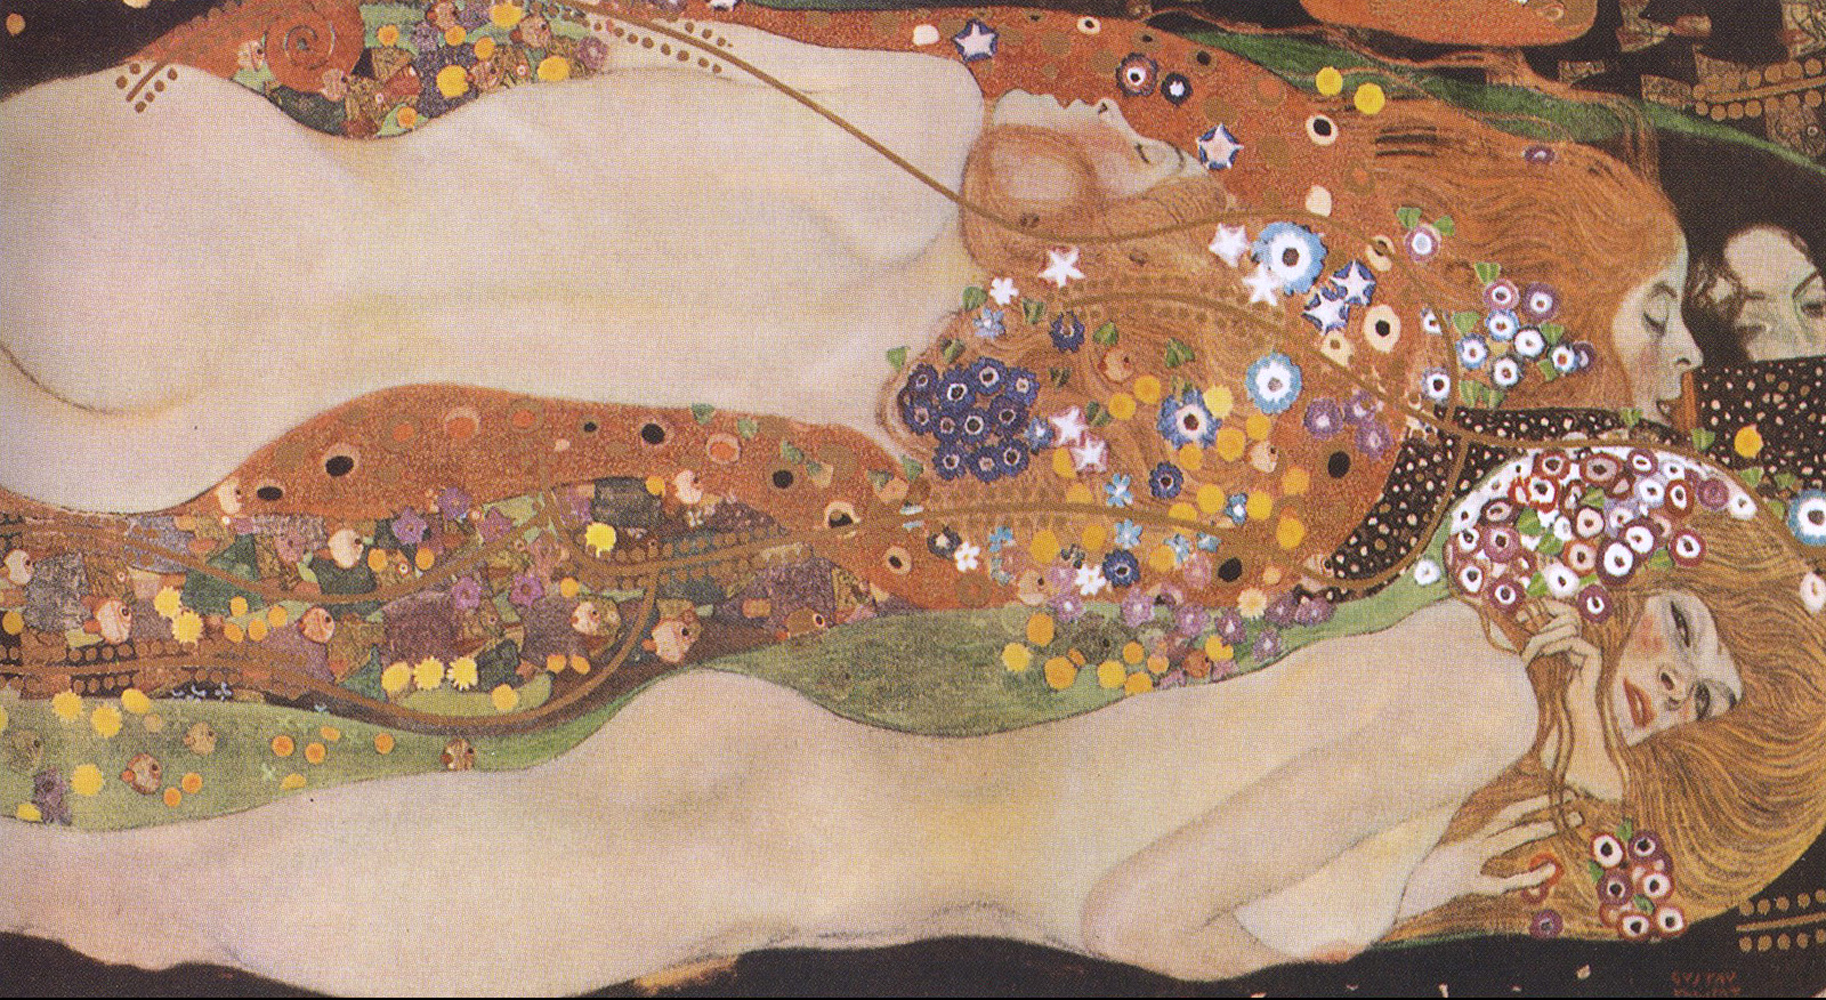 Serpents II by Gustav Klimt - 1907 - 80 x 145 cm private collection